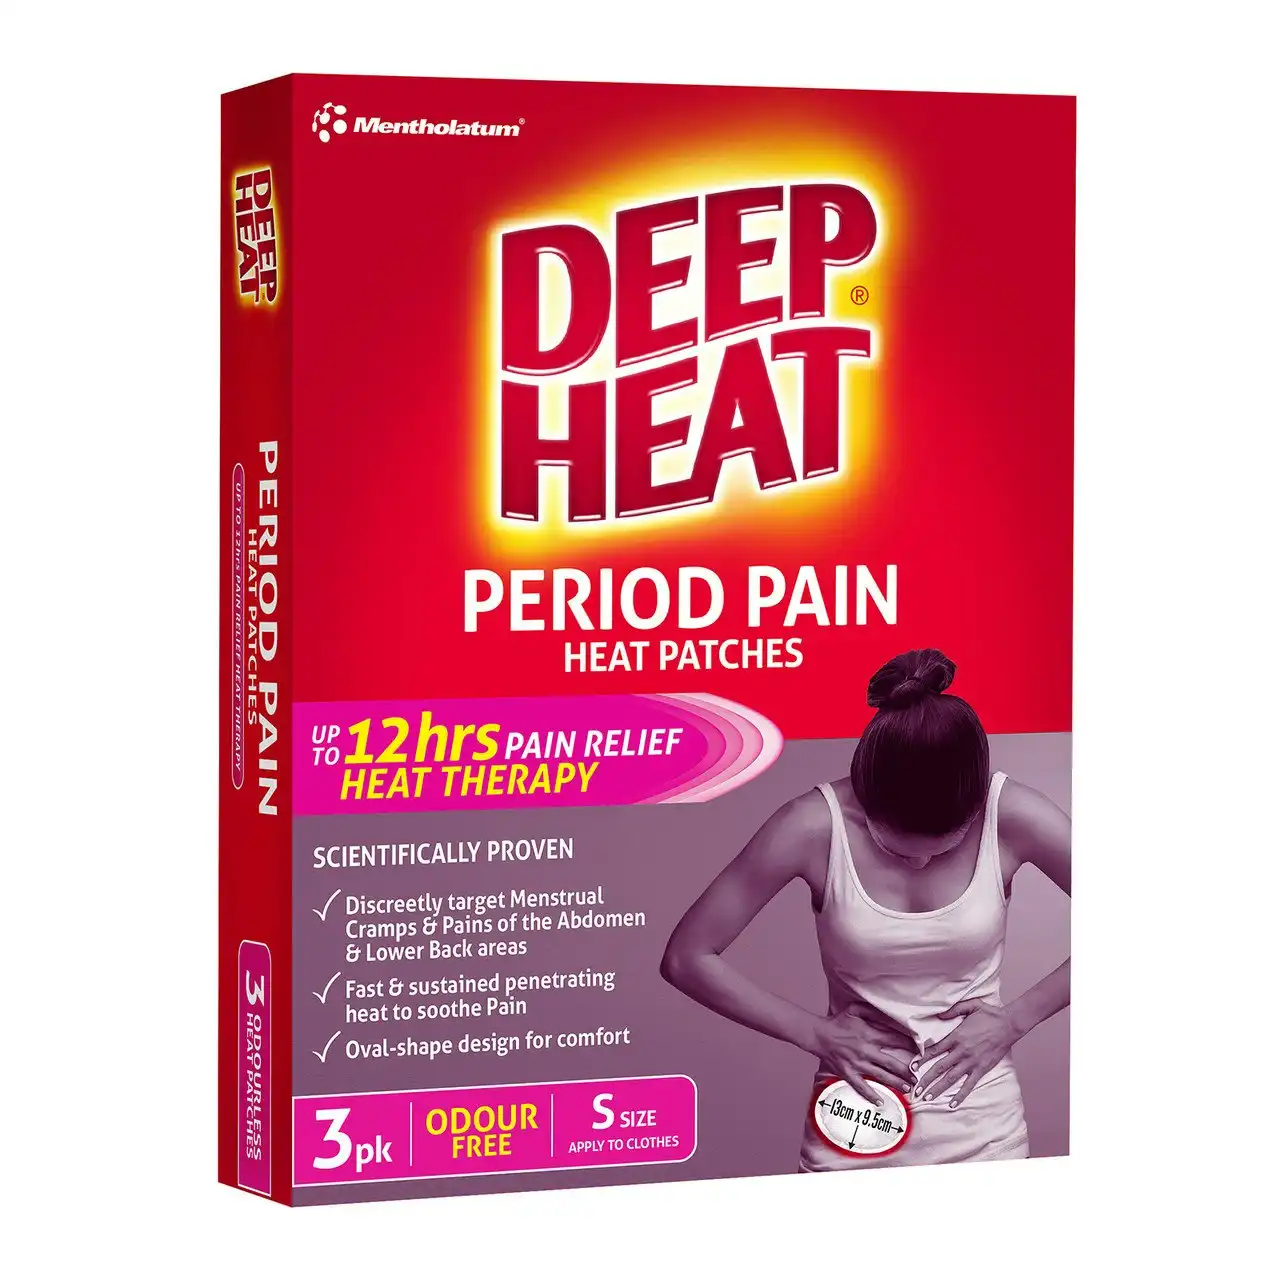 Deep Heat Period Pain Heat Patches 3 Pack